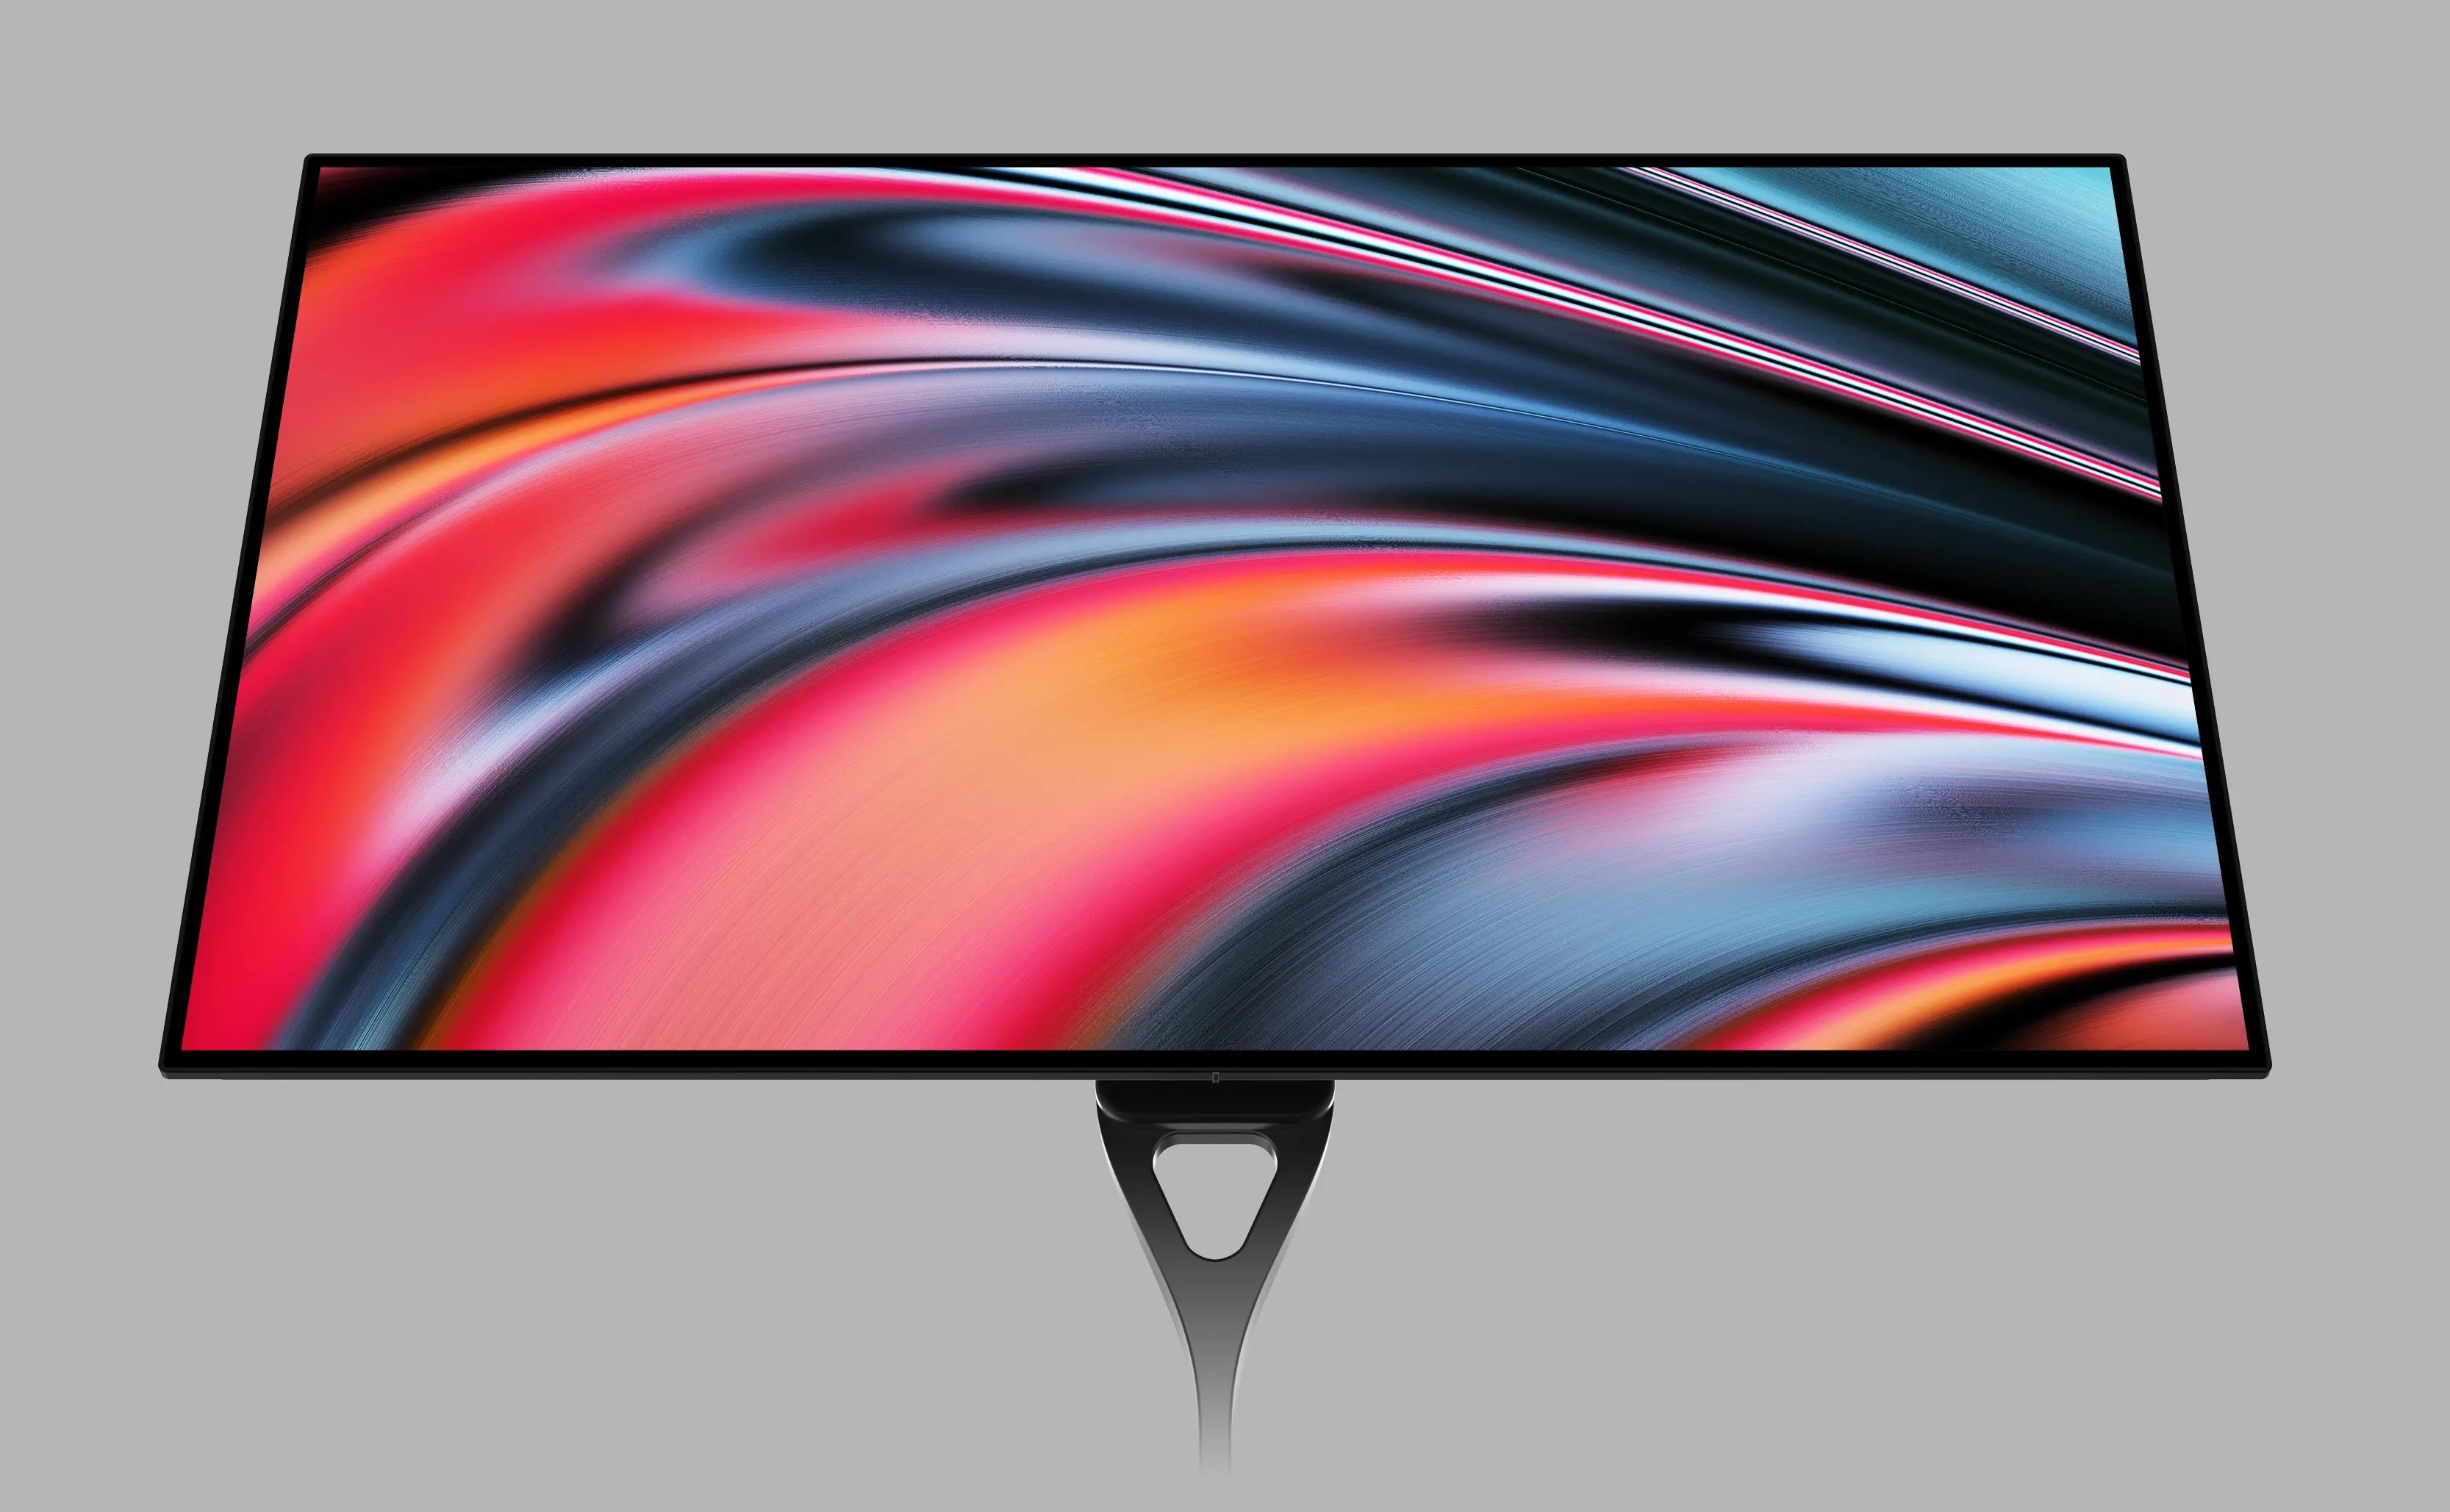 How can I protect BenQ OLED monitor against image burn-in?